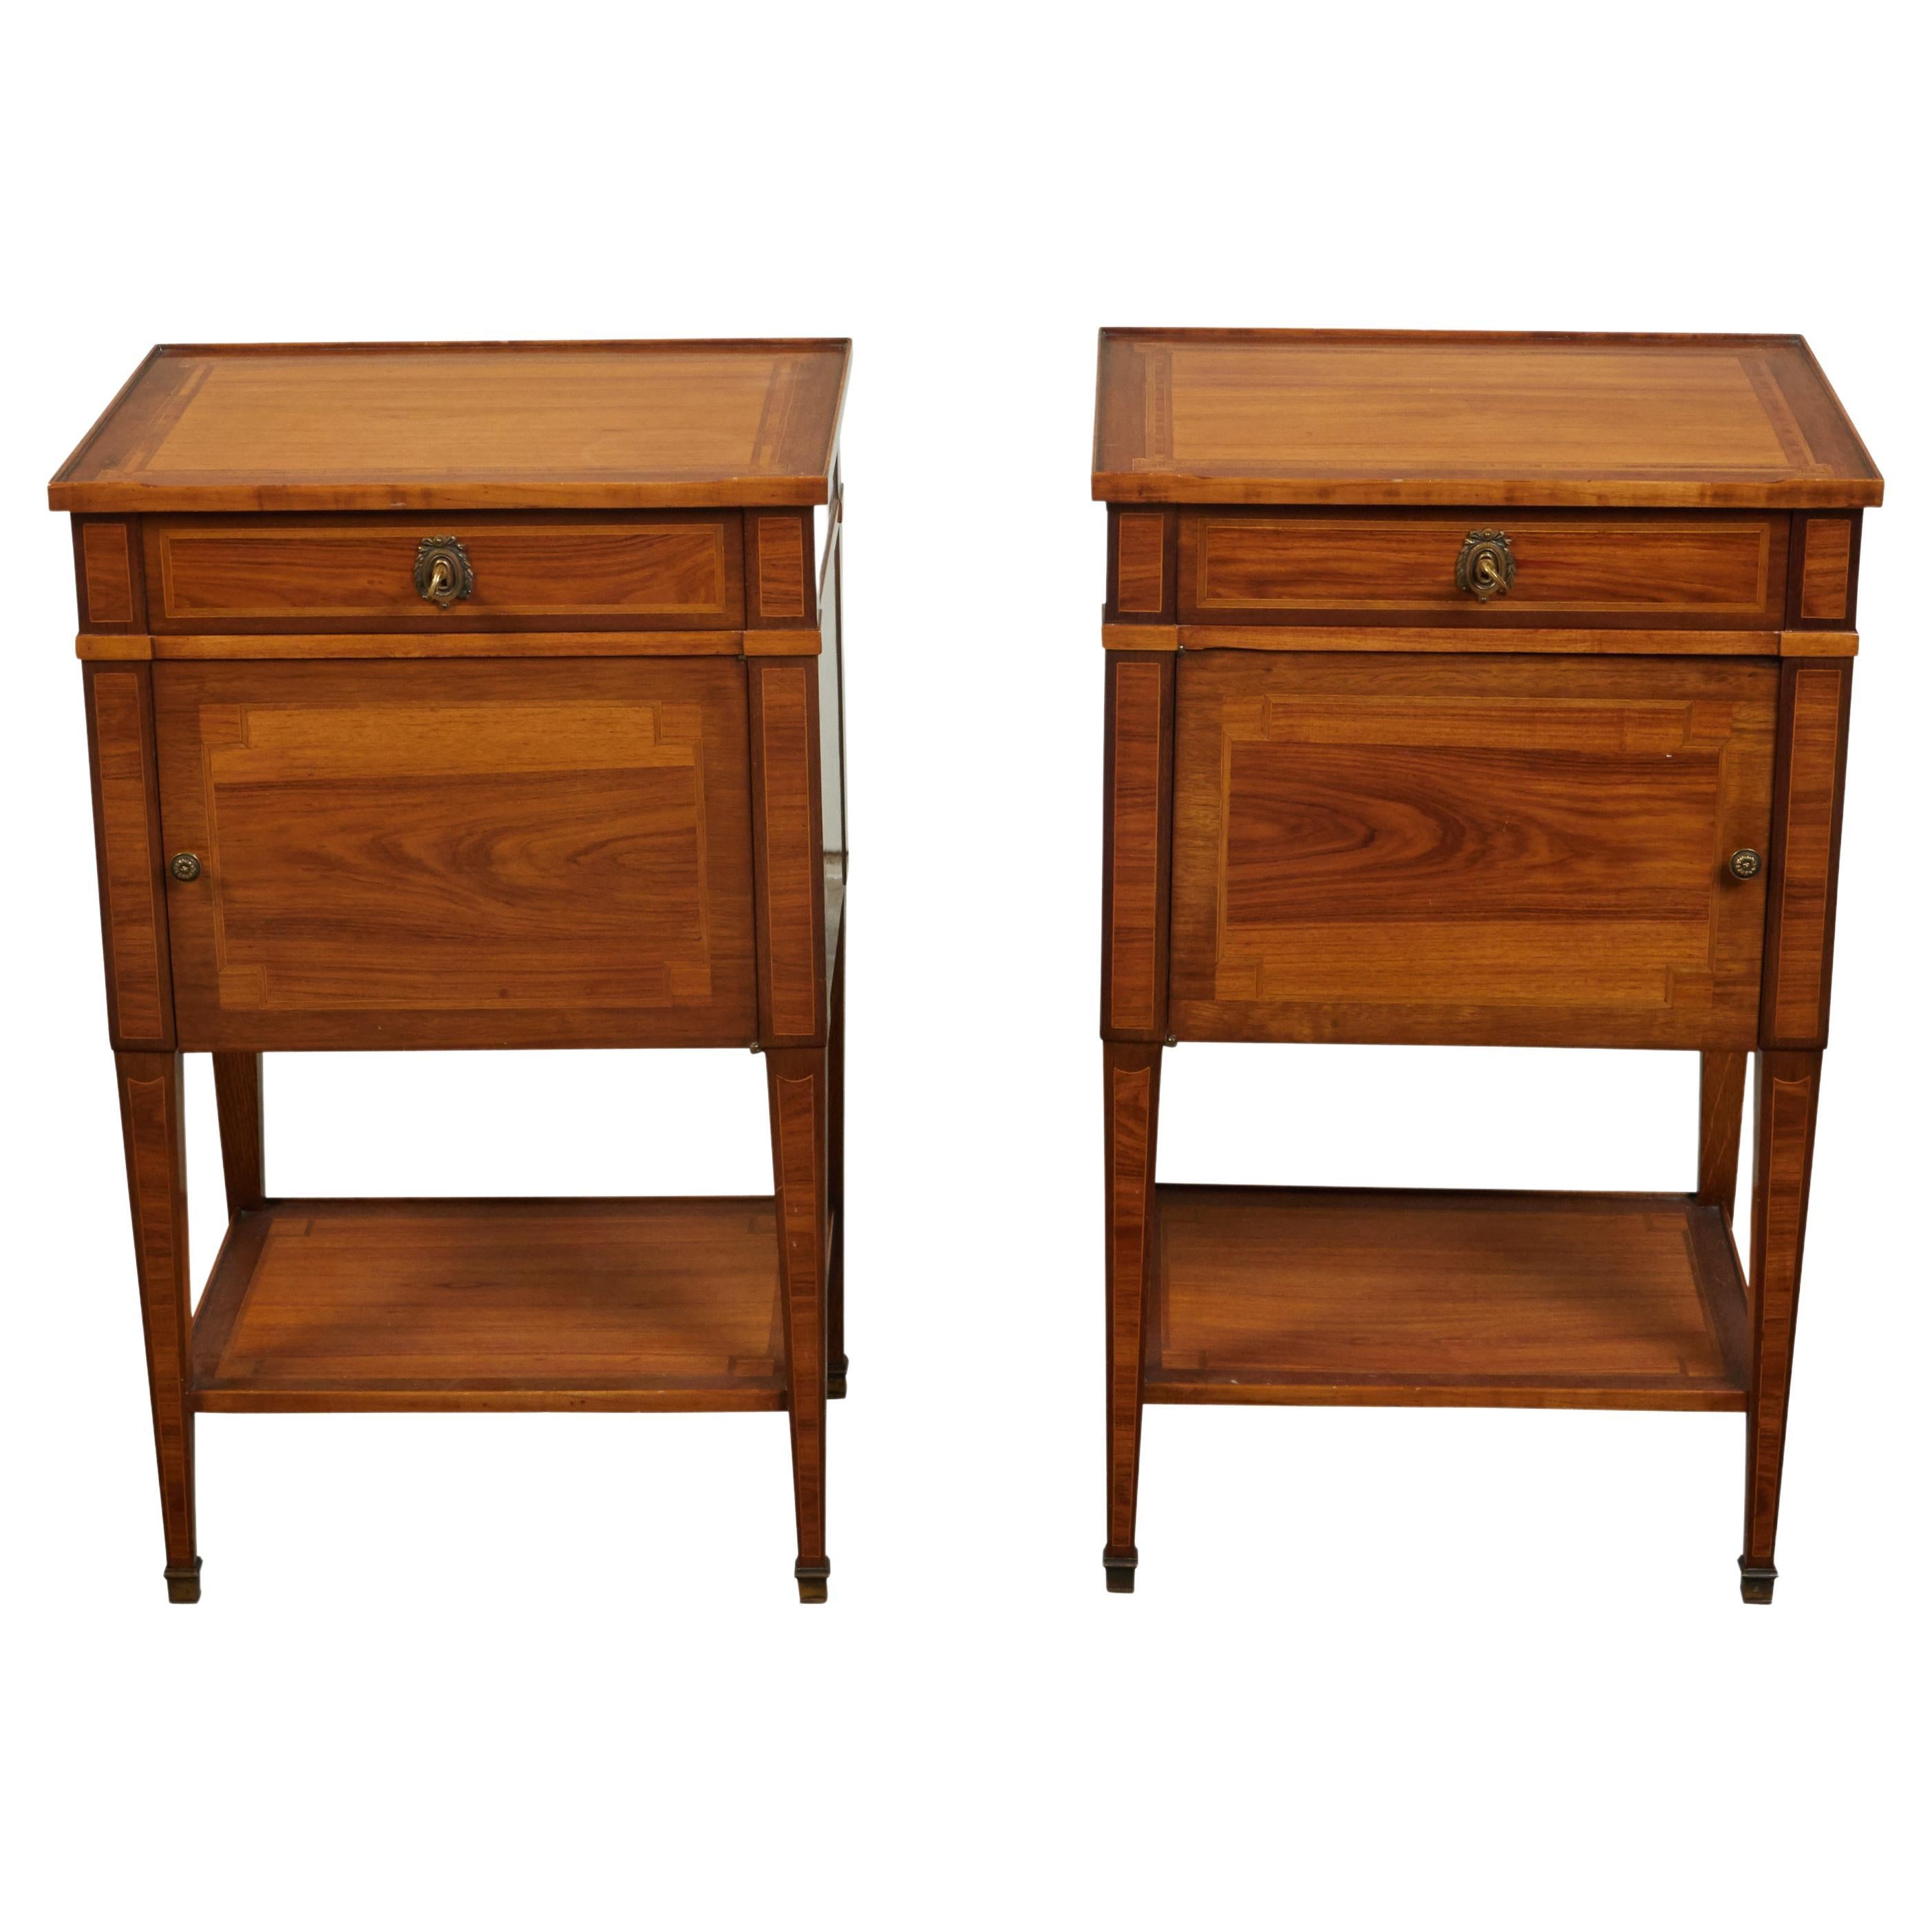 Pair of French Paul Sormani Late 19th Century Bedside Tables with Inlay